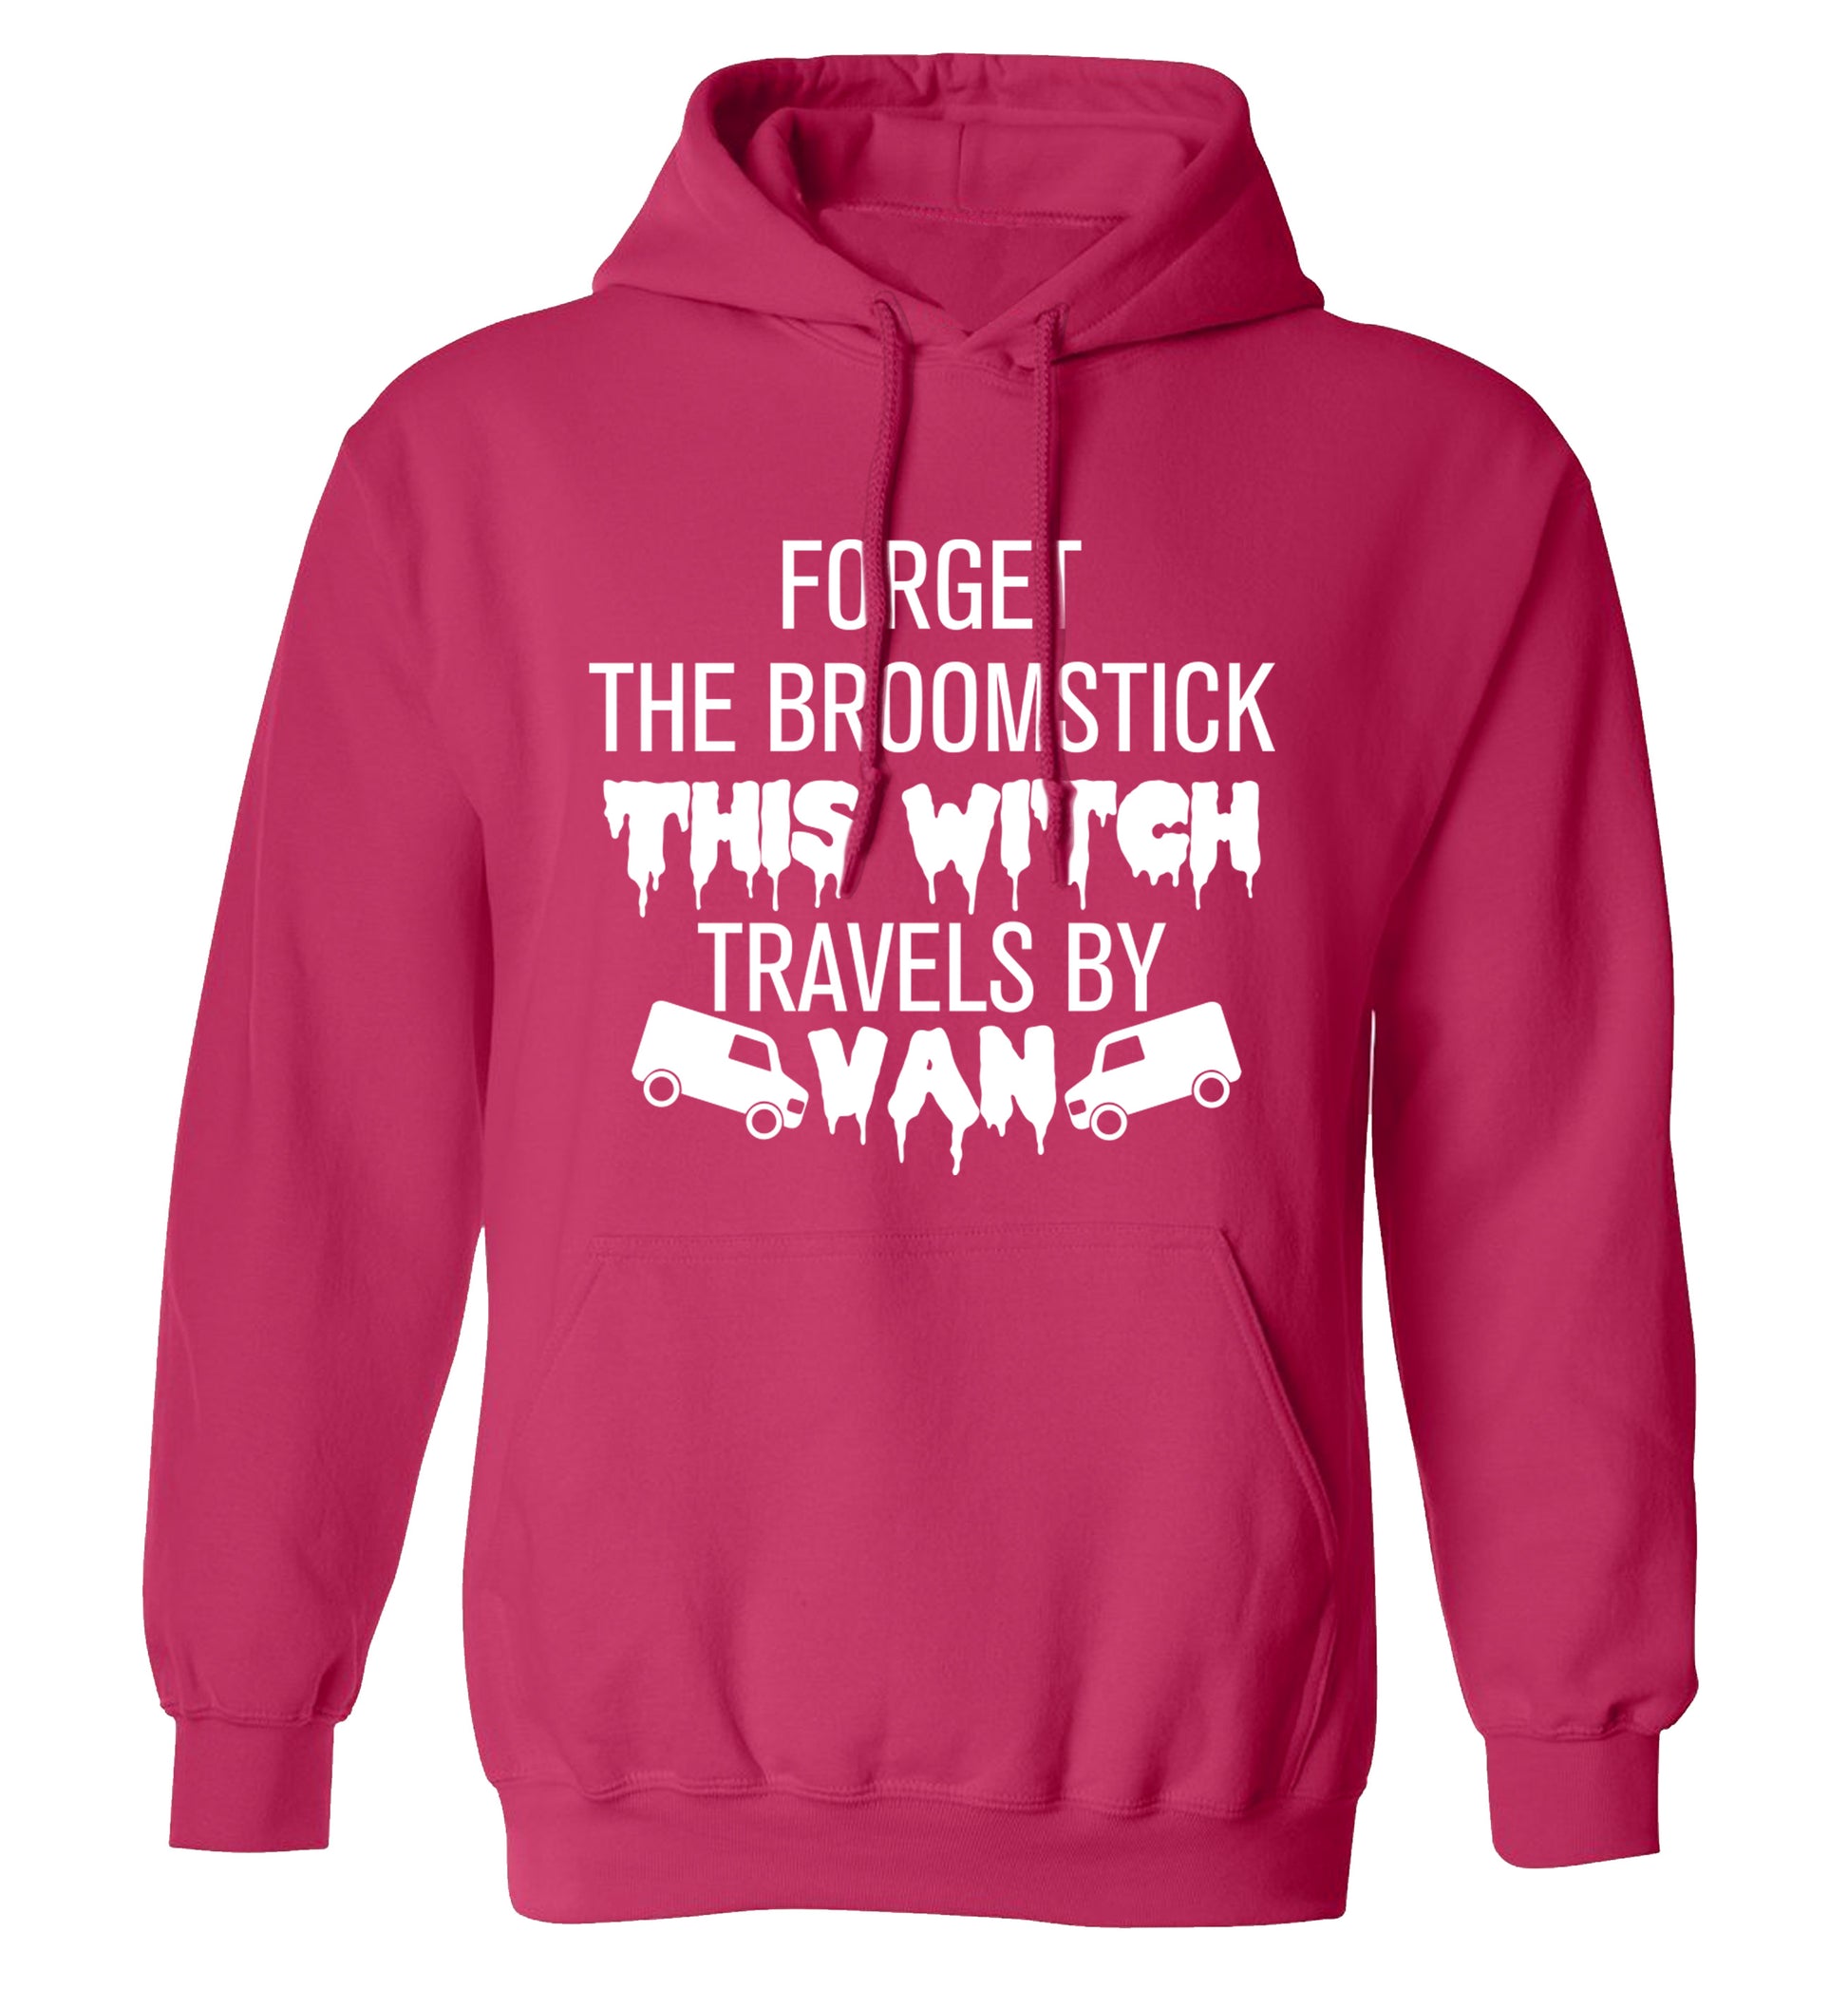 Forget the broomstick this witch travels by van adults unisexpink hoodie 2XL